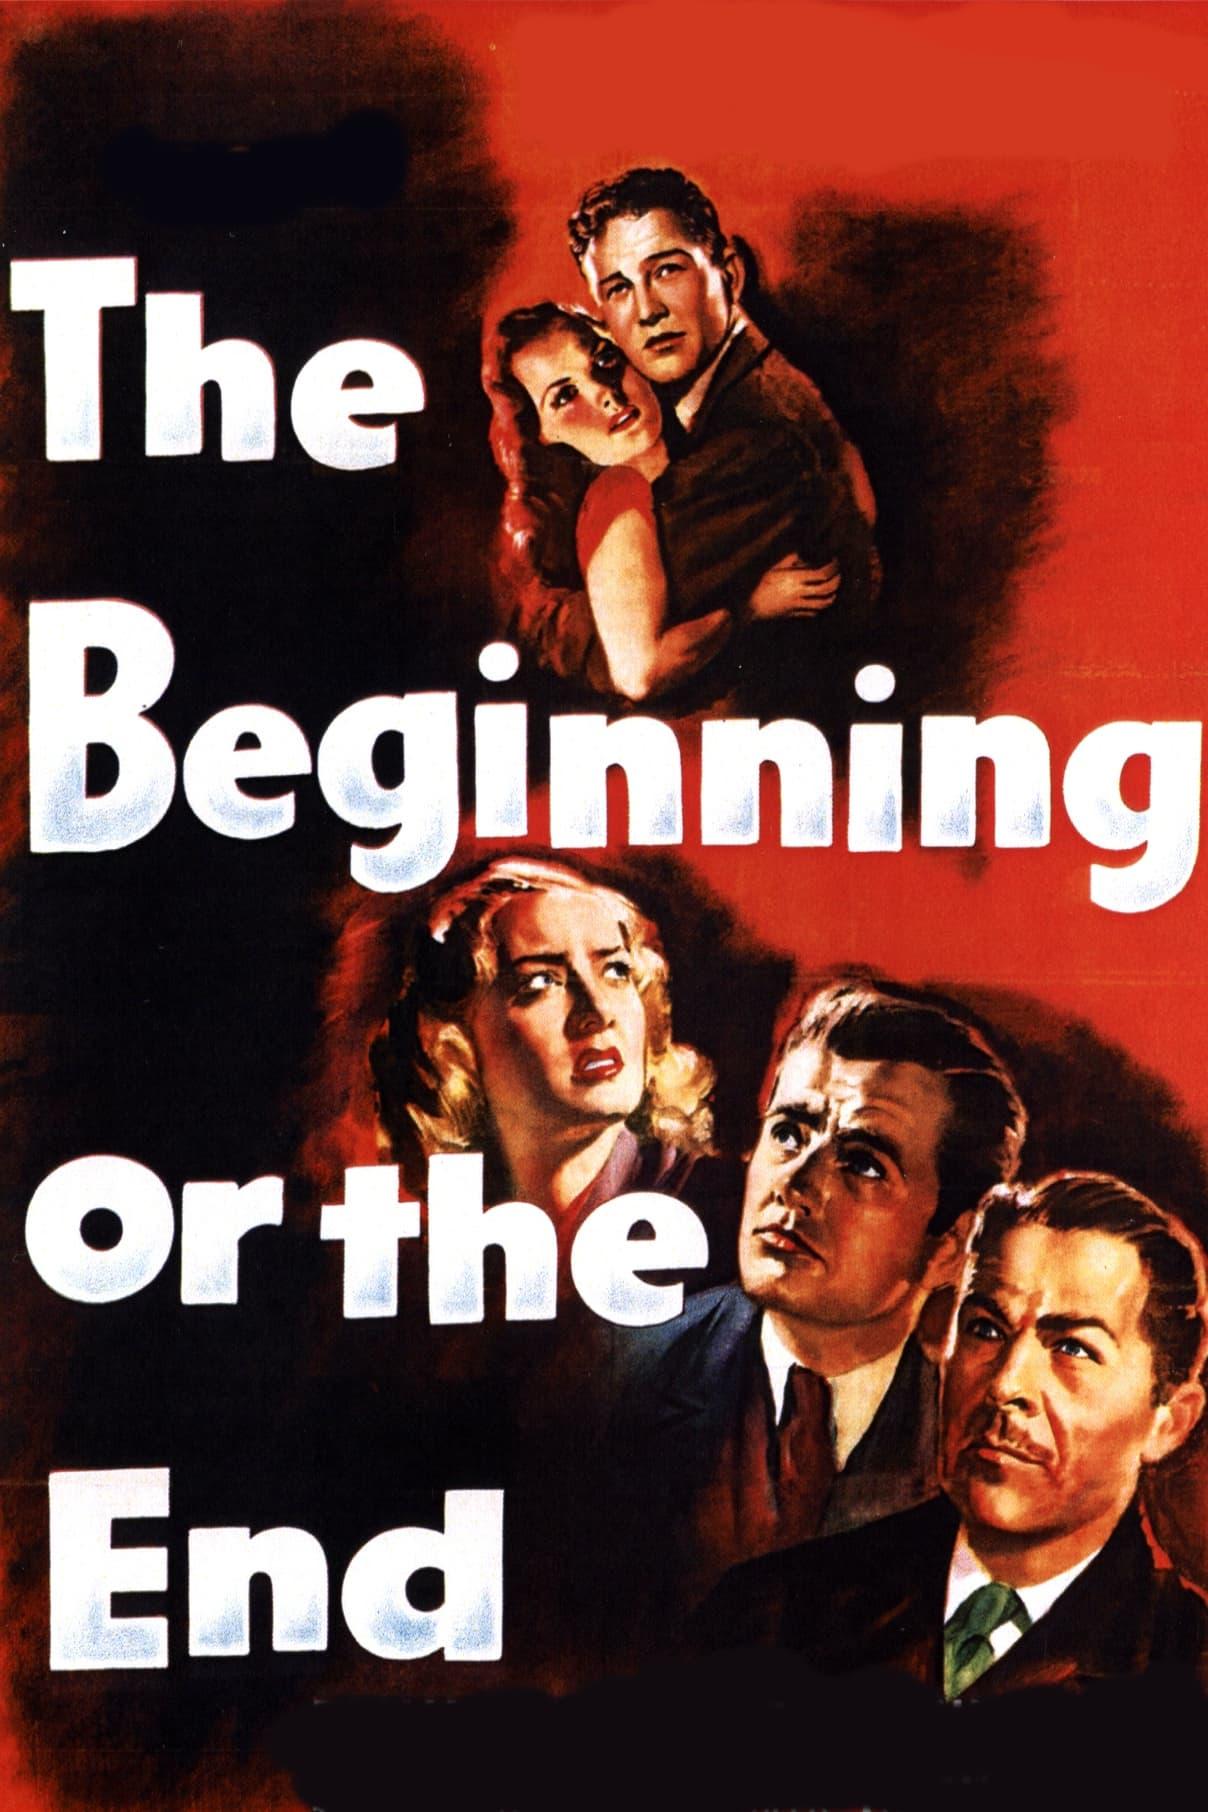 The Beginning or the End poster